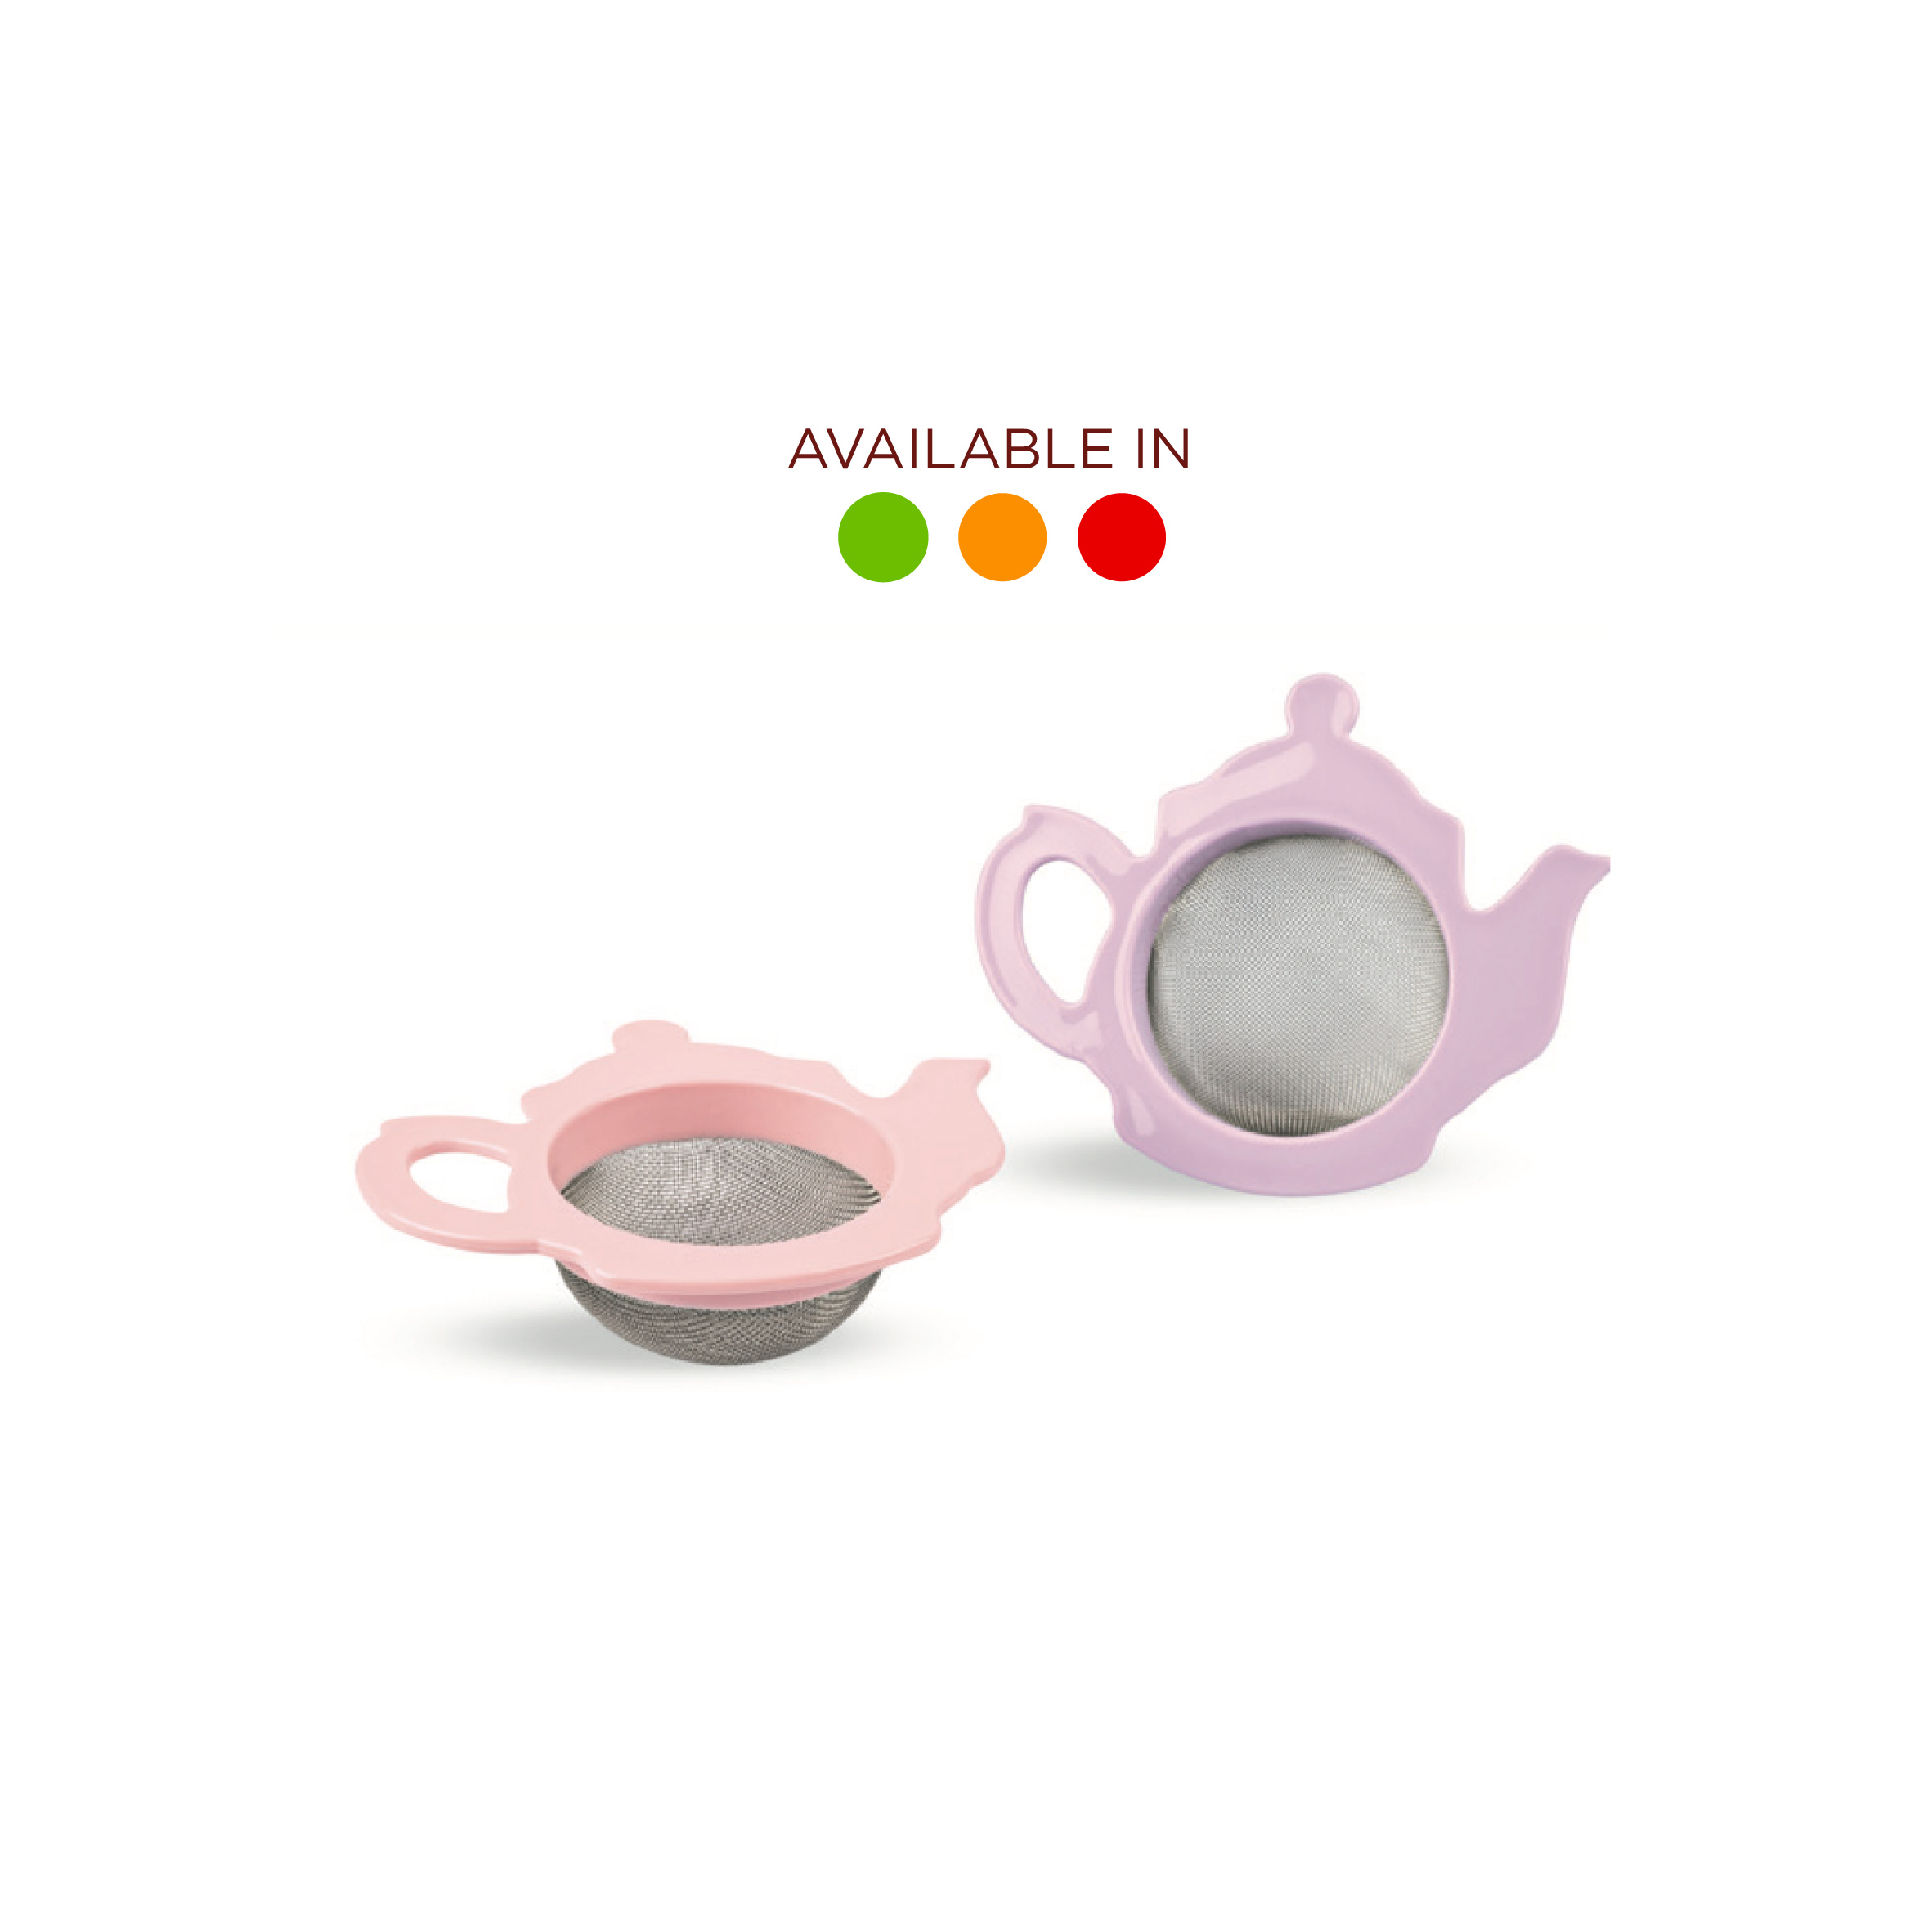 Urve Teapot Tea Strainer In Display Box (Available in Green / Orange / Red), UR-3056